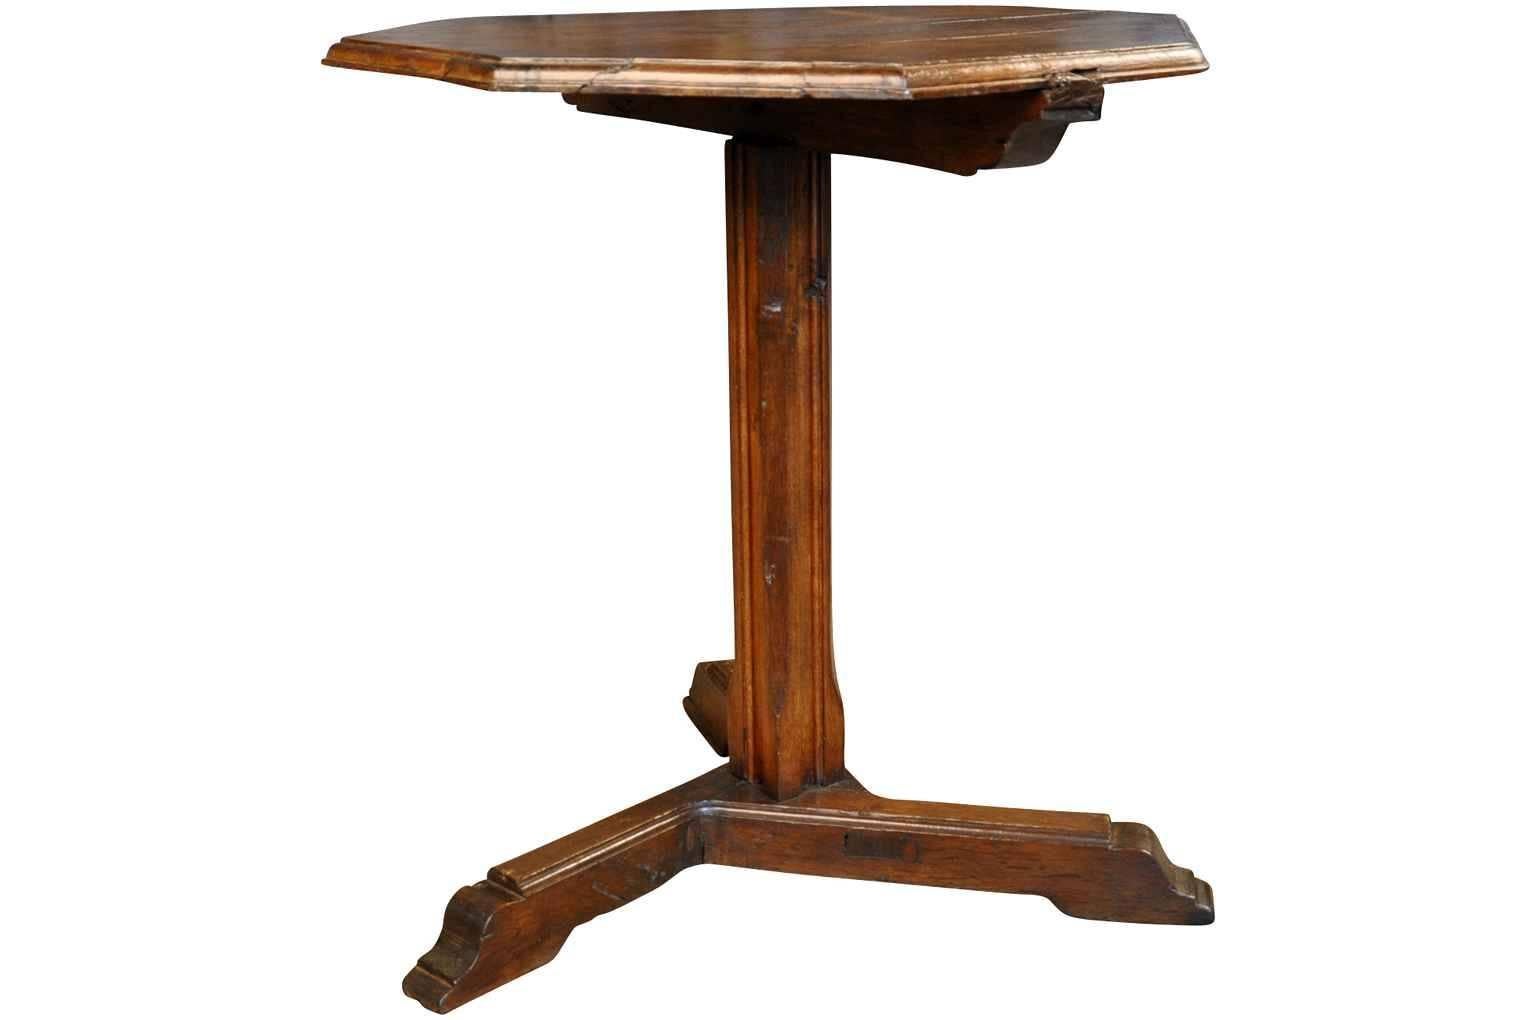 A charming 19th century Gueridon from the Catalan region of Spain. Handsomely constructed in chestnut with a unique tripod base. Rich and luminous patina.